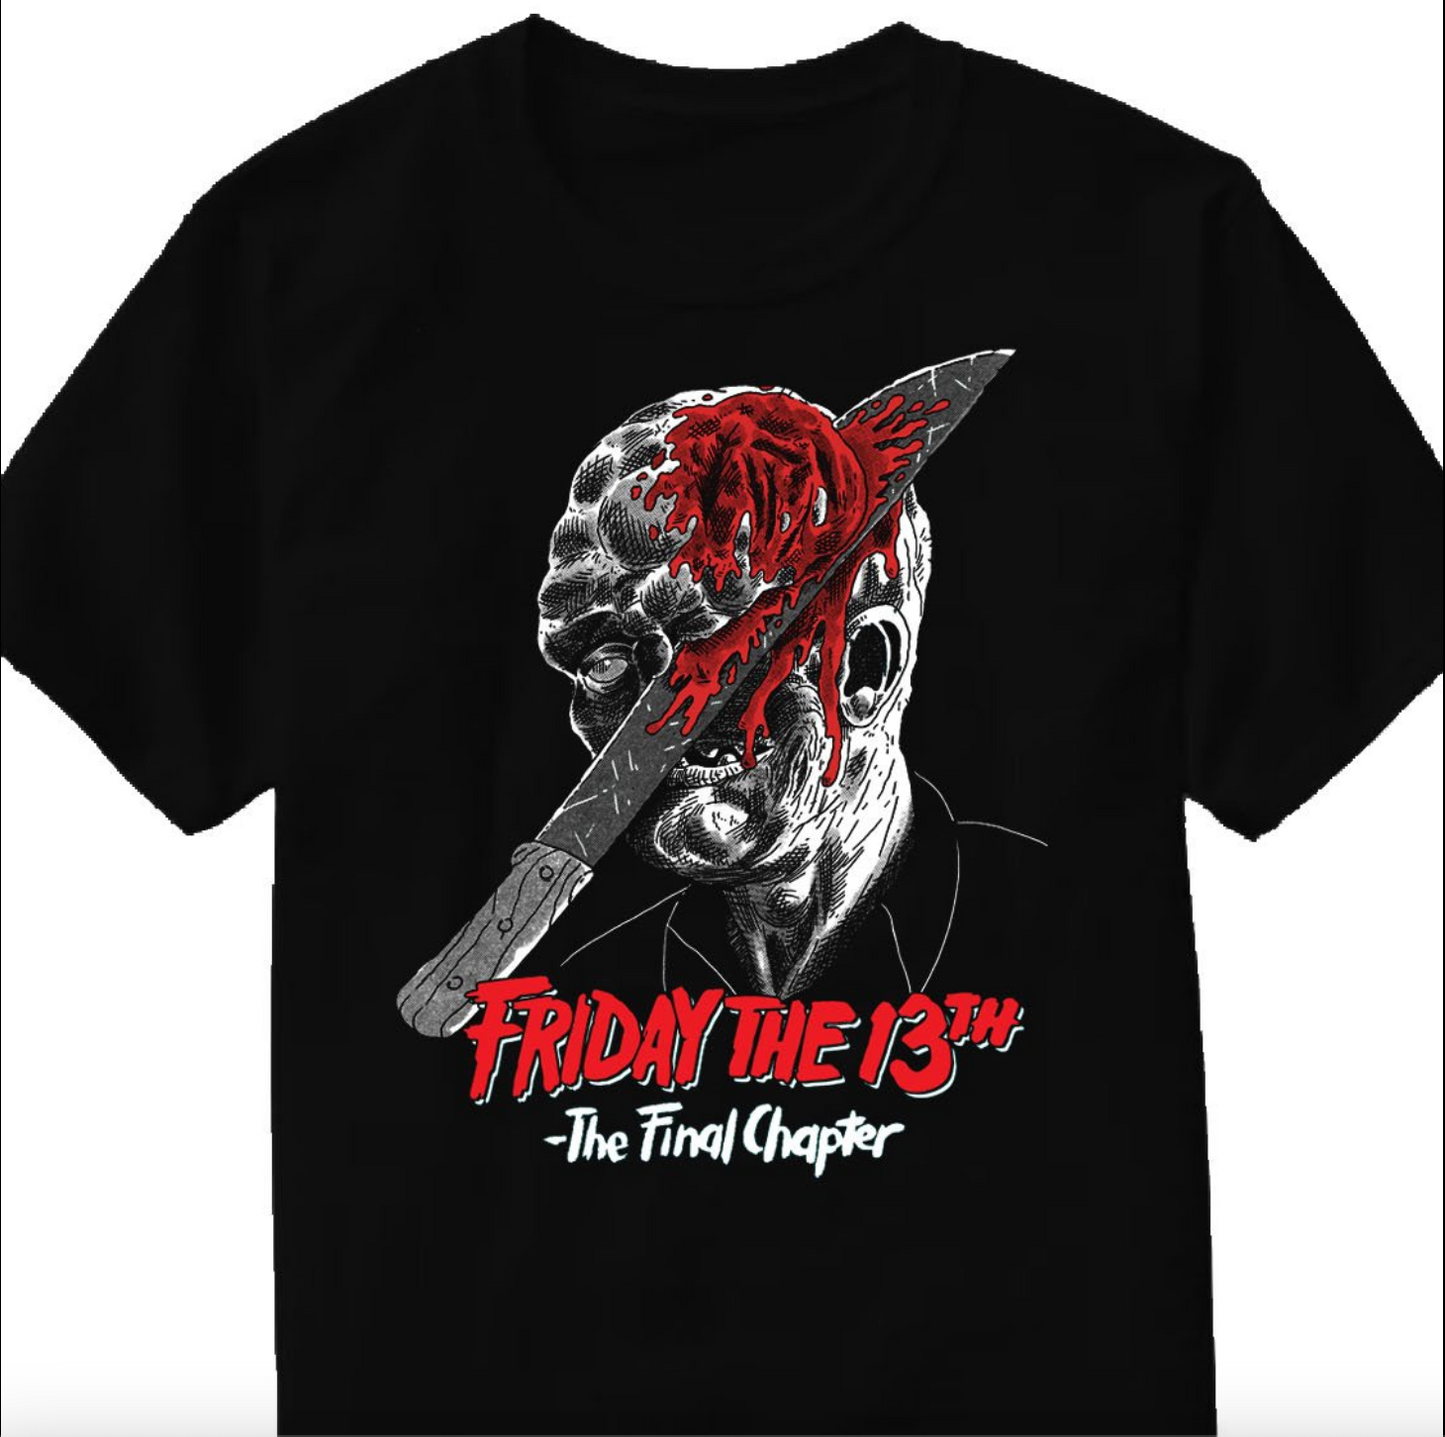 Friday the 13th Final Chapter Tee by Worserbeings